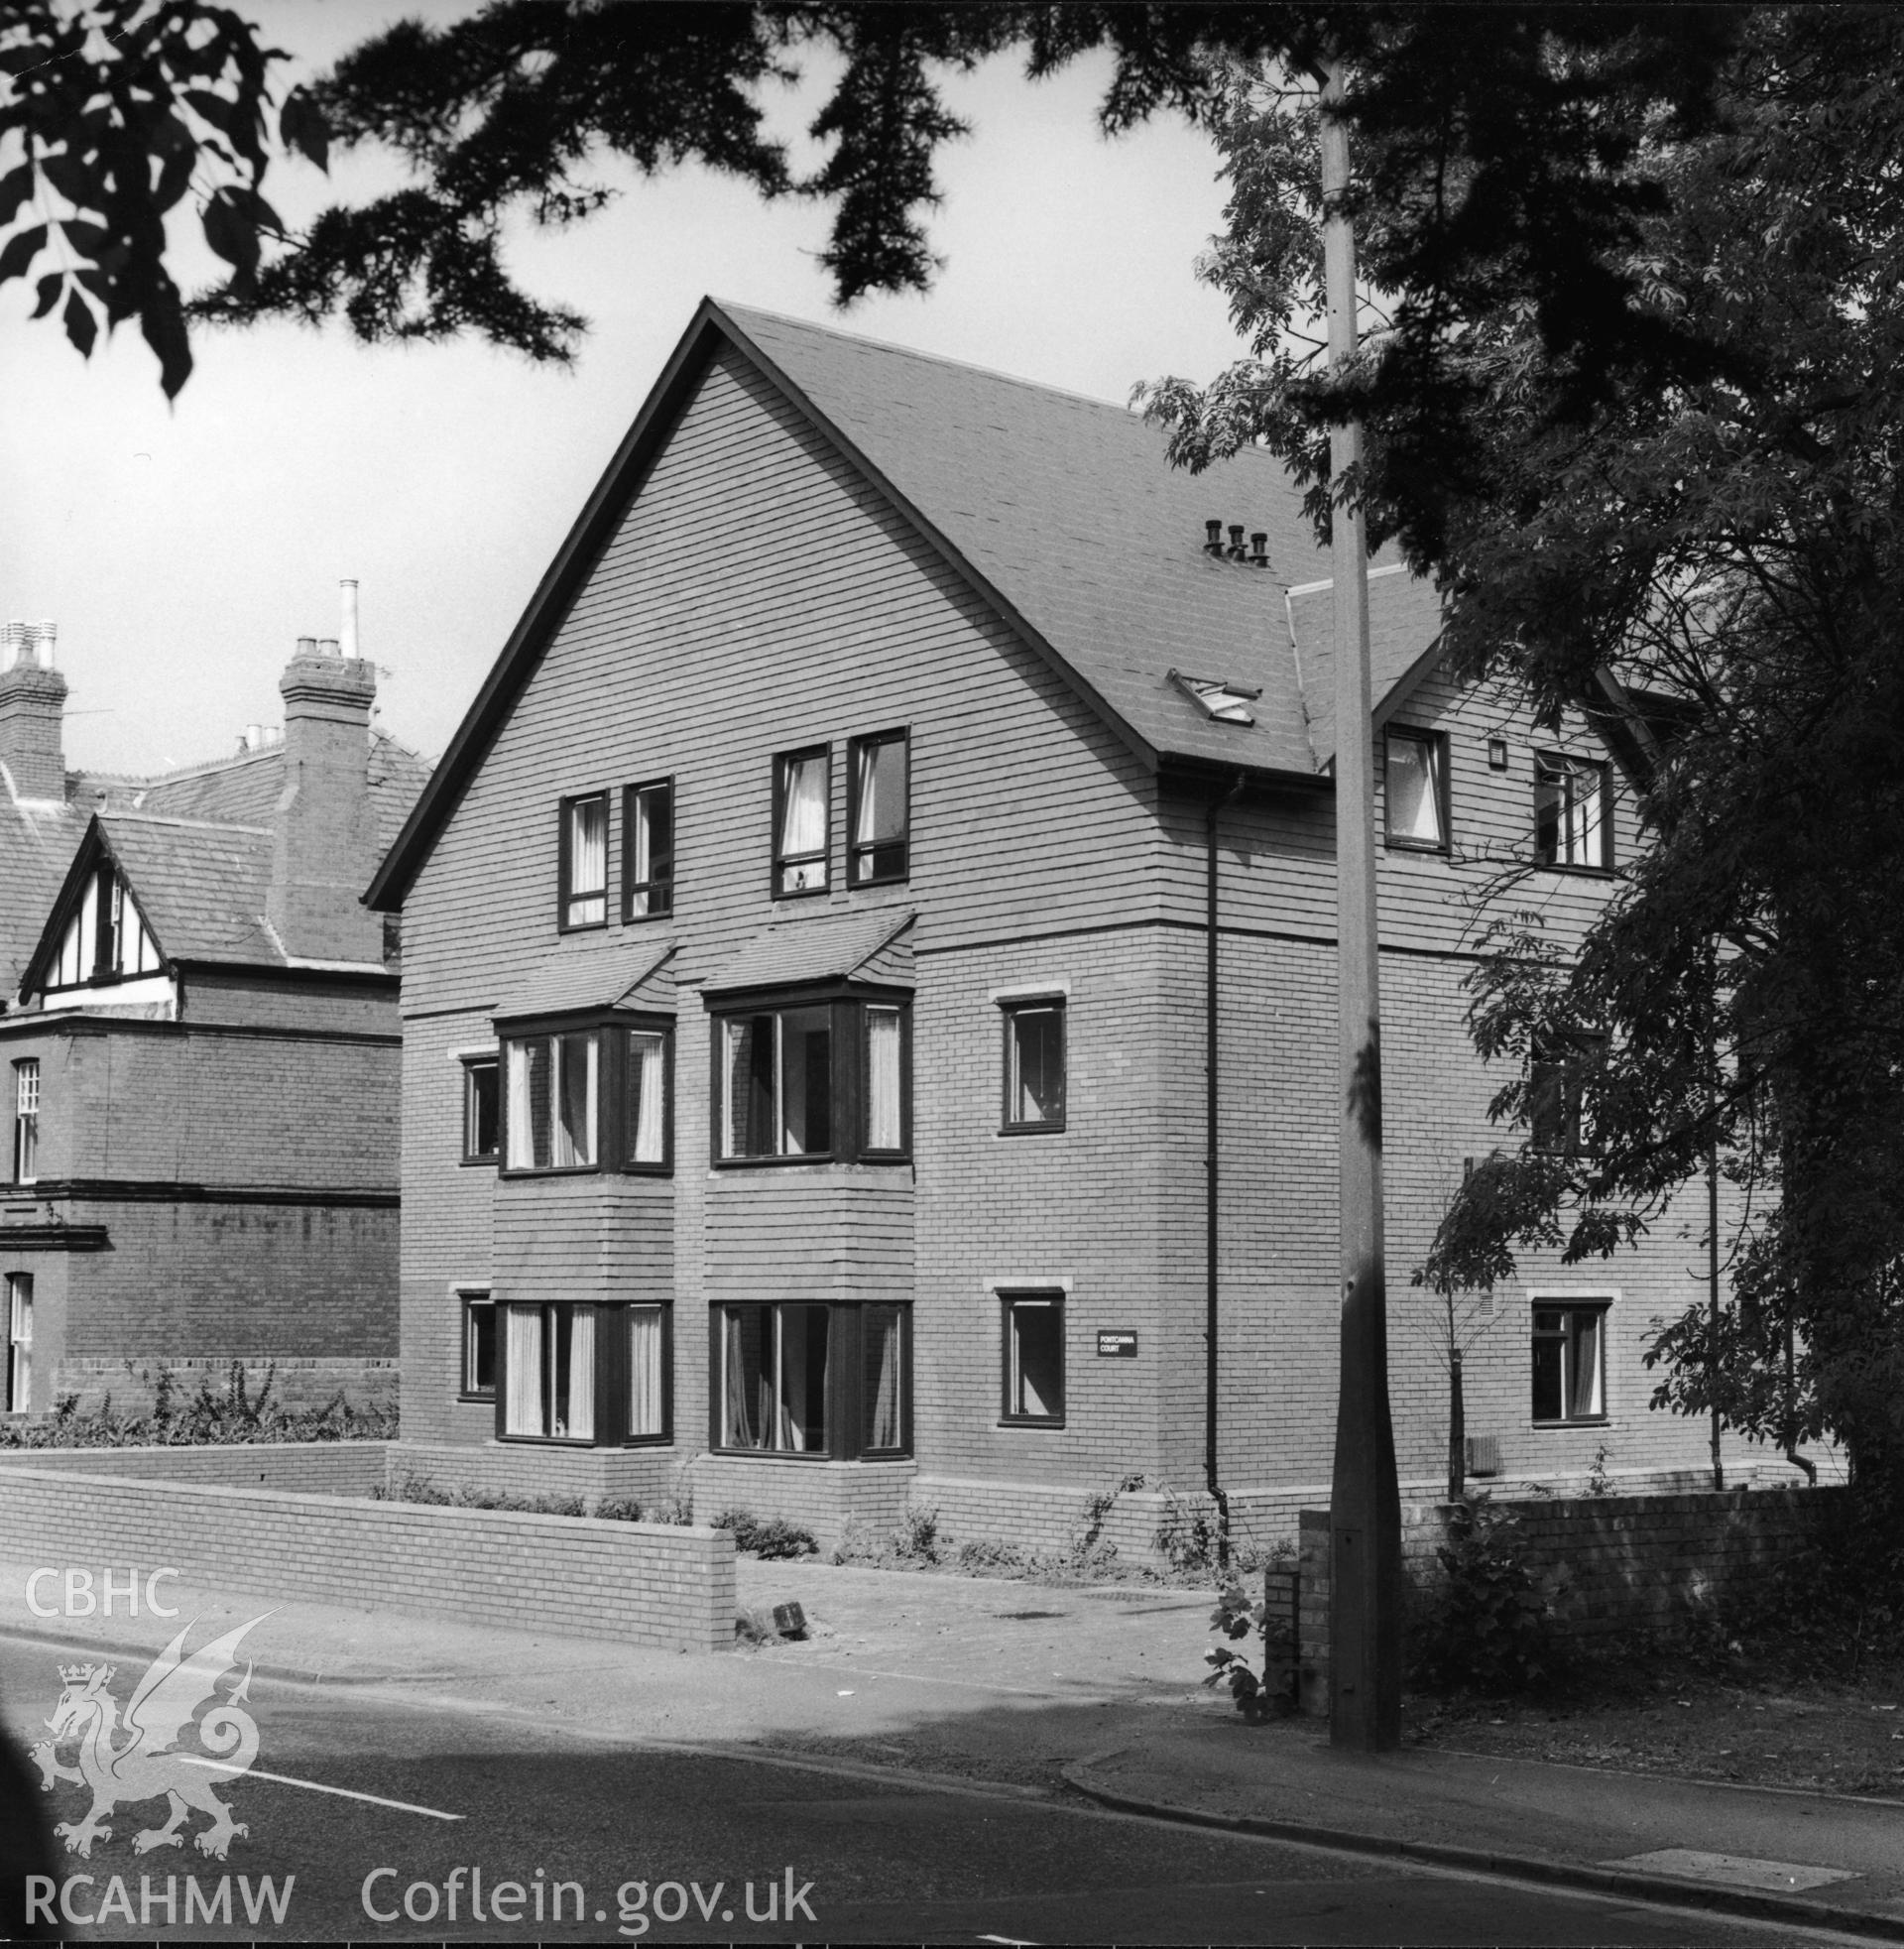 1 b/w print showing exterior view of Pontcanna Court, Cardiff Road, Cardiff; collated by the former Central Office of Information.